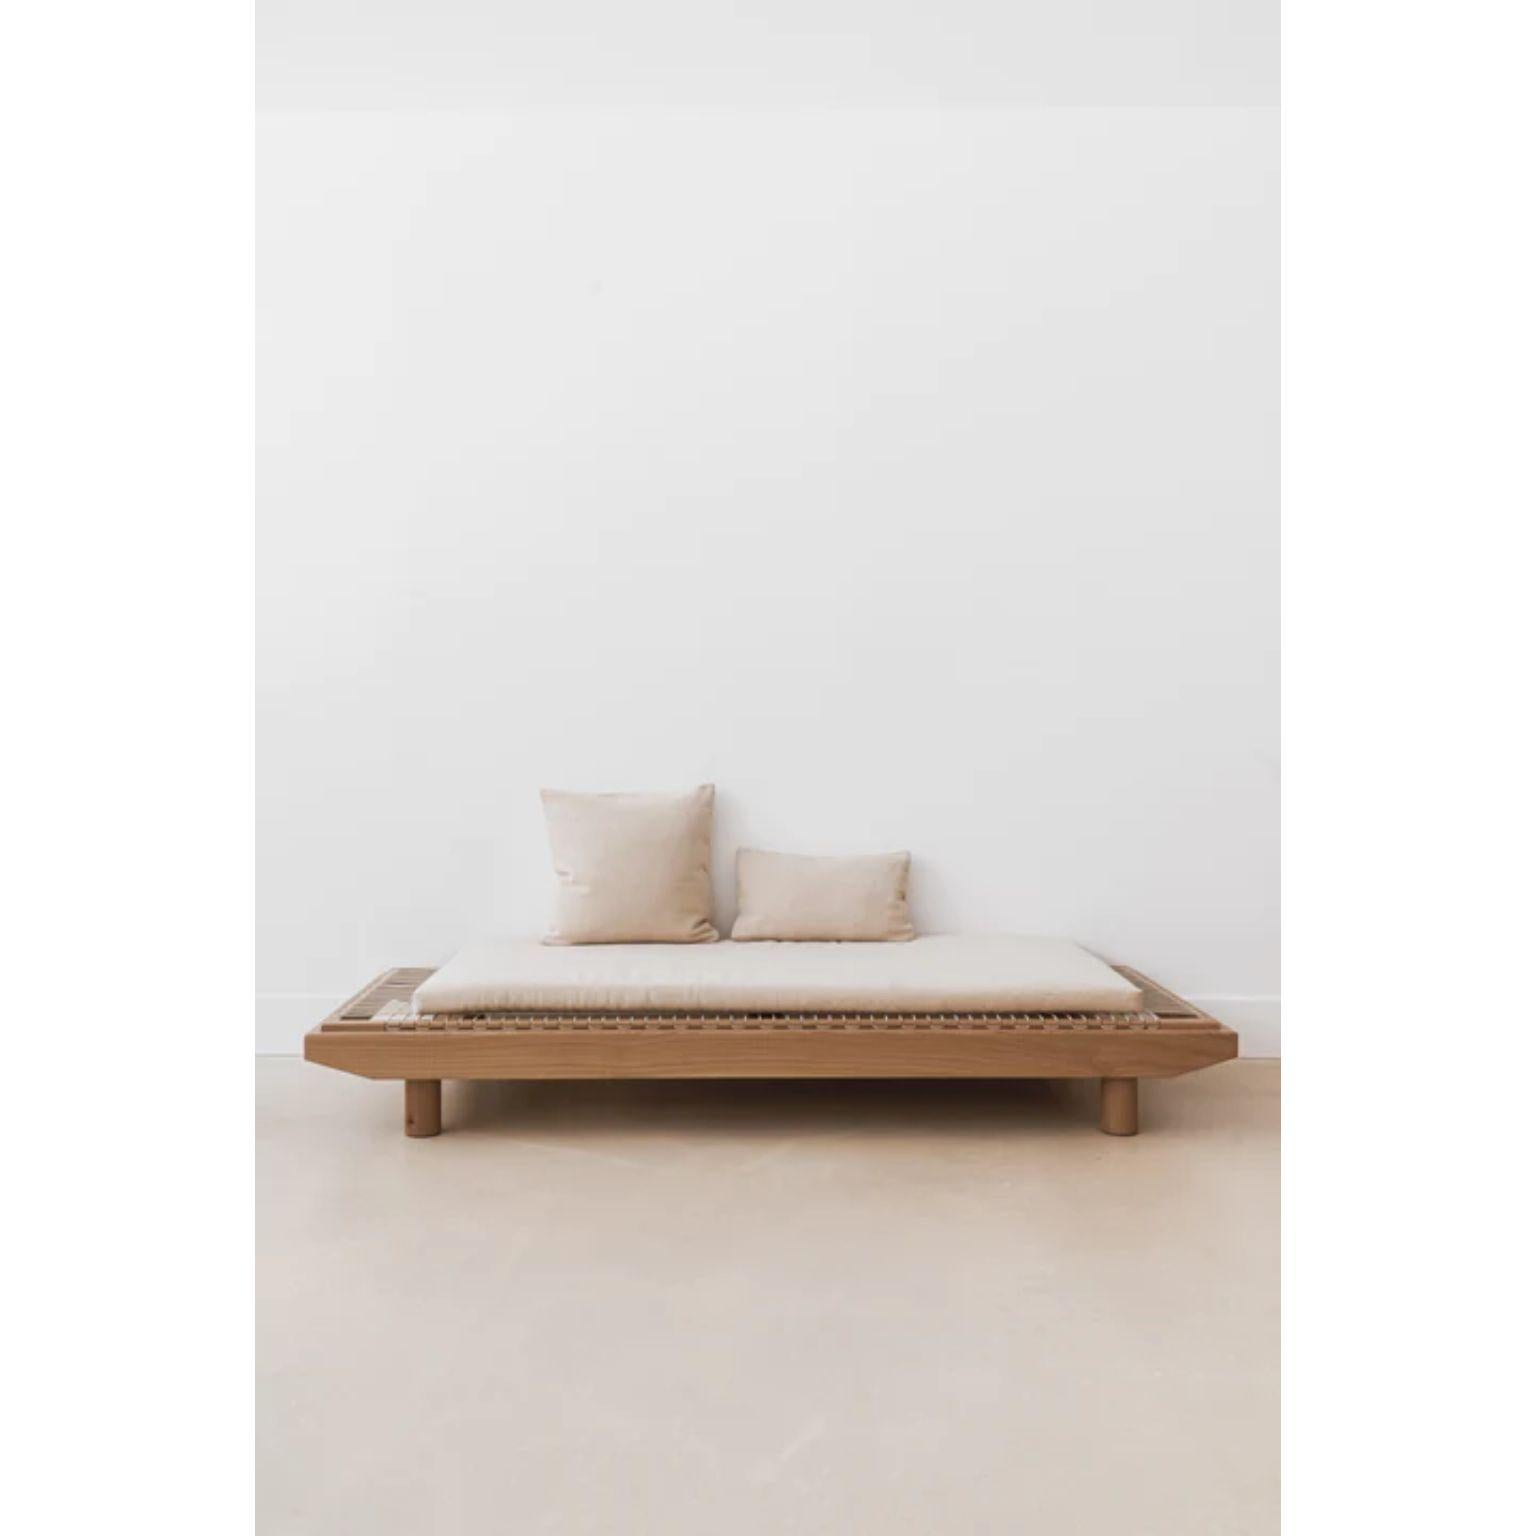 Dena Wool Ecru Daybed by La Lune
Dimensions: D 75 x W 200 x H 31 cm.
Materials: Oak and Wool.

Oak structure, mattresses and cushions in wool or linen. Produced in France. Custom sizes available. Please contact us.

La Lune is above all a project to